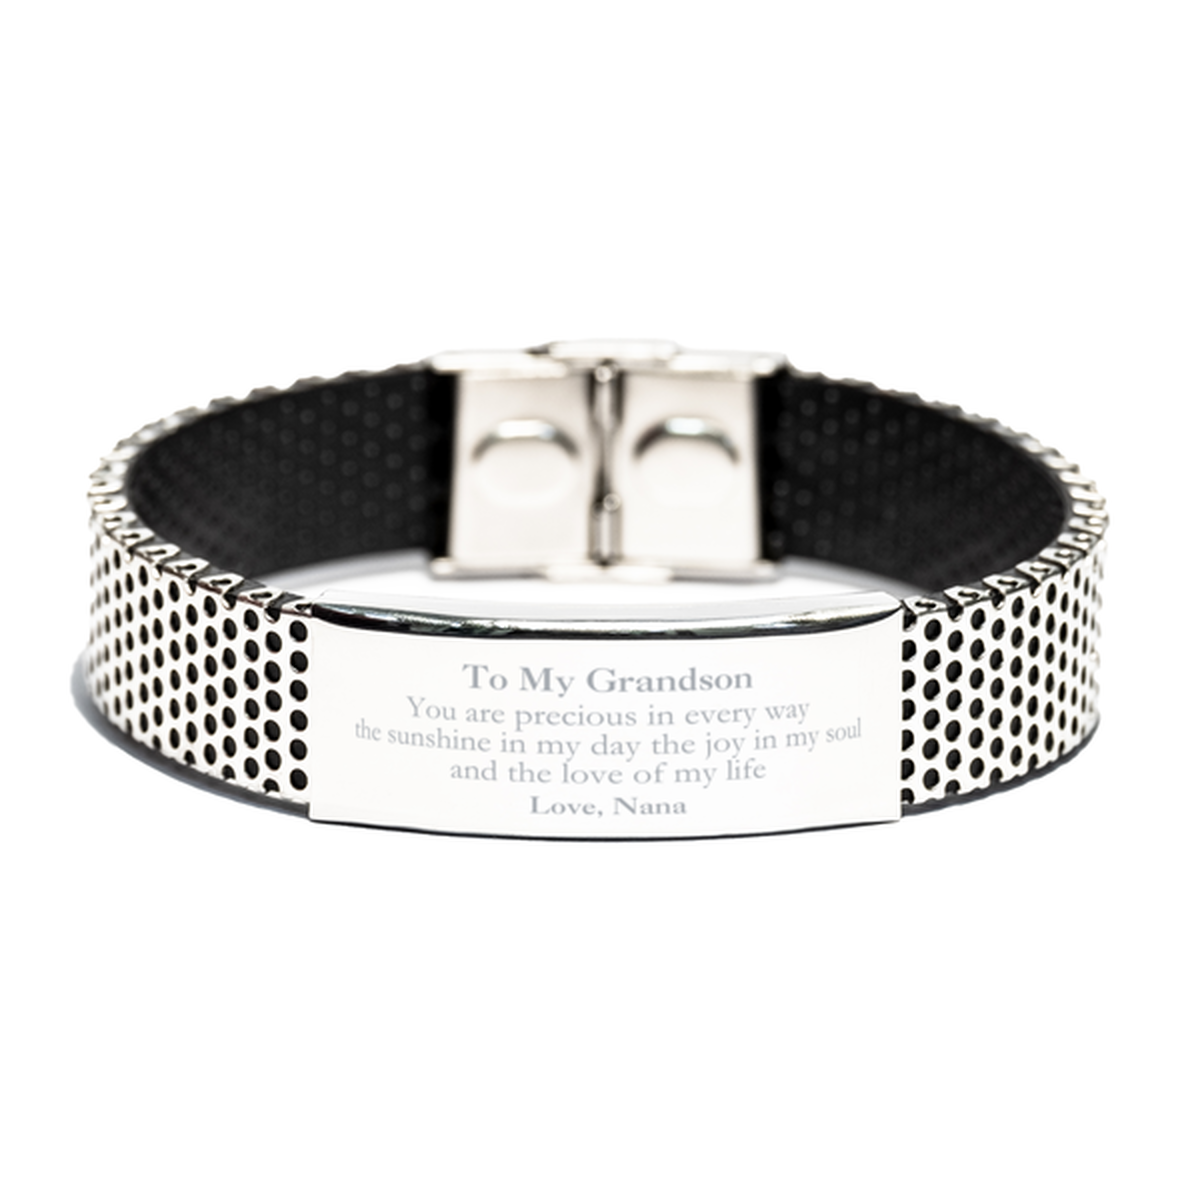 Graduation Gifts for Grandson Stainless Steel Bracelet Present from Nana, Christmas Grandson Birthday Gifts Grandson You are precious in every way the sunshine in my day. Love, Nana